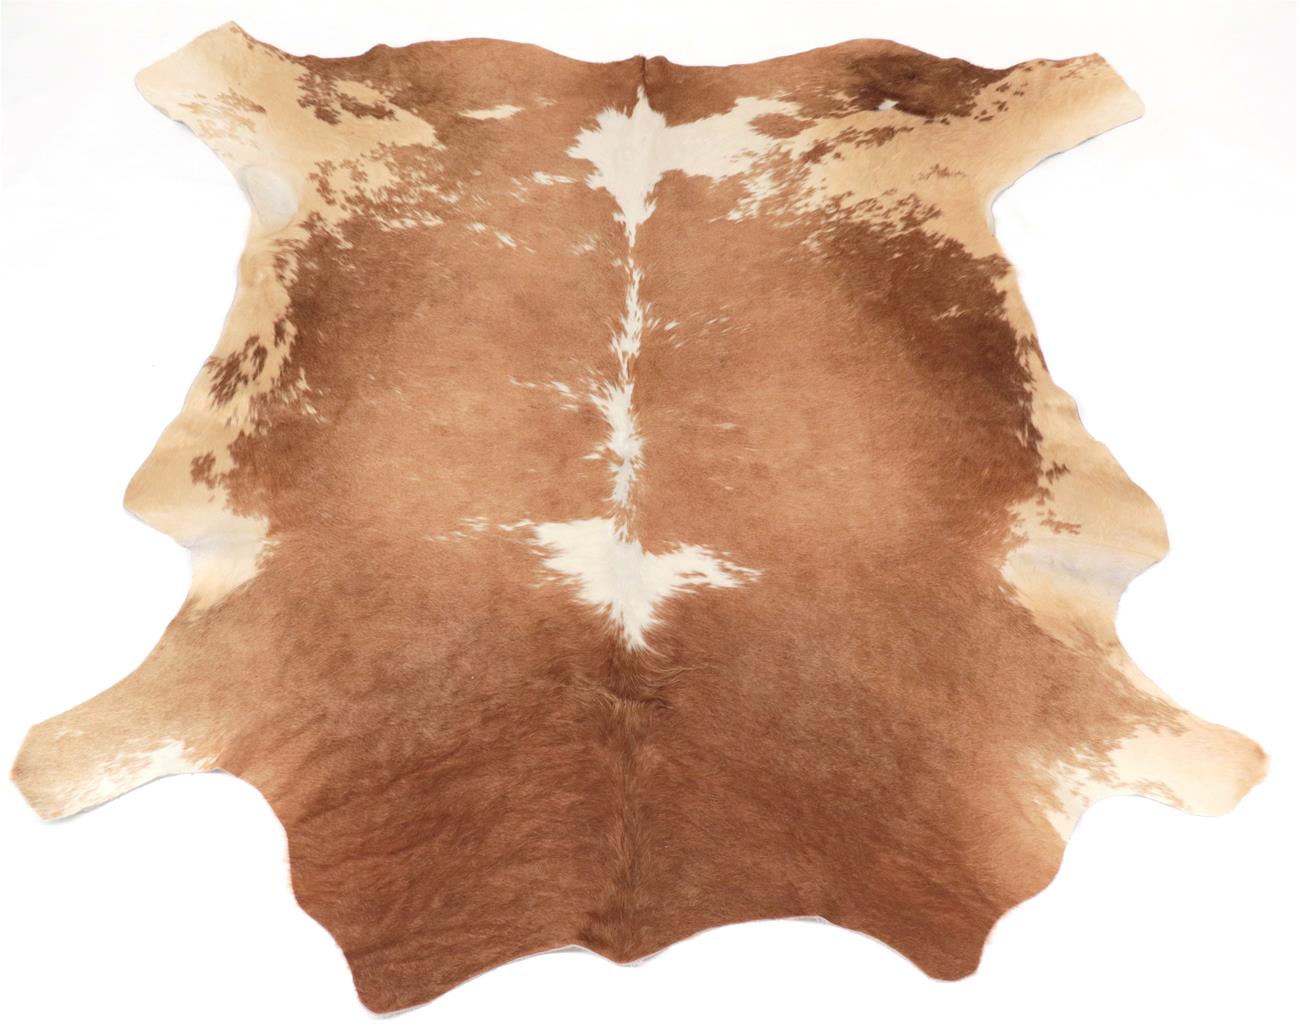 Skins/Hides: South African Nguni Cow Hide (Bos taurus), modern, AA Grade, excellent quality, Nguni